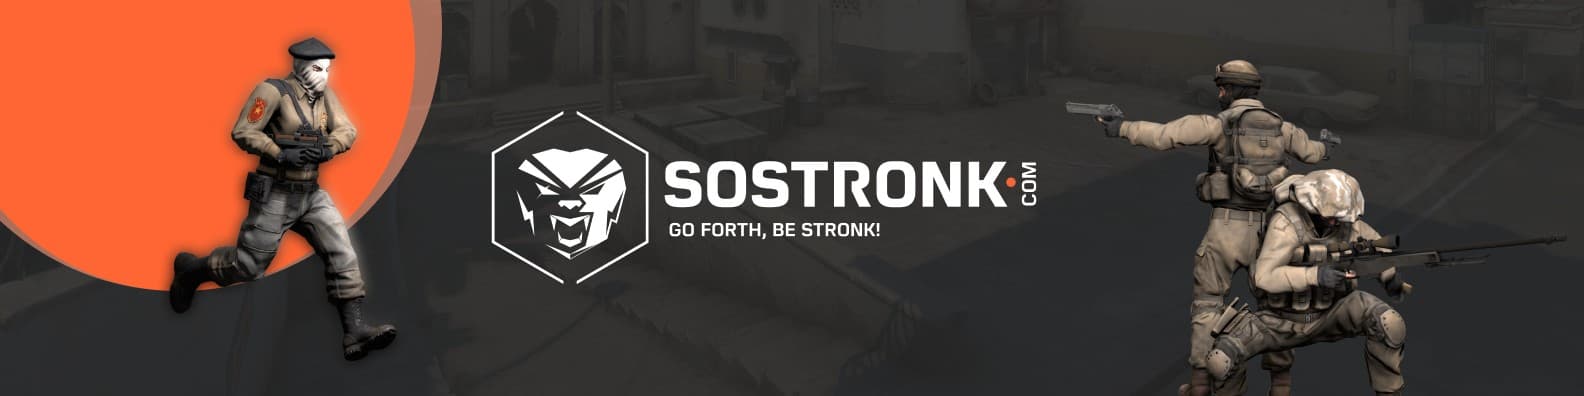 SoStronk cover picture